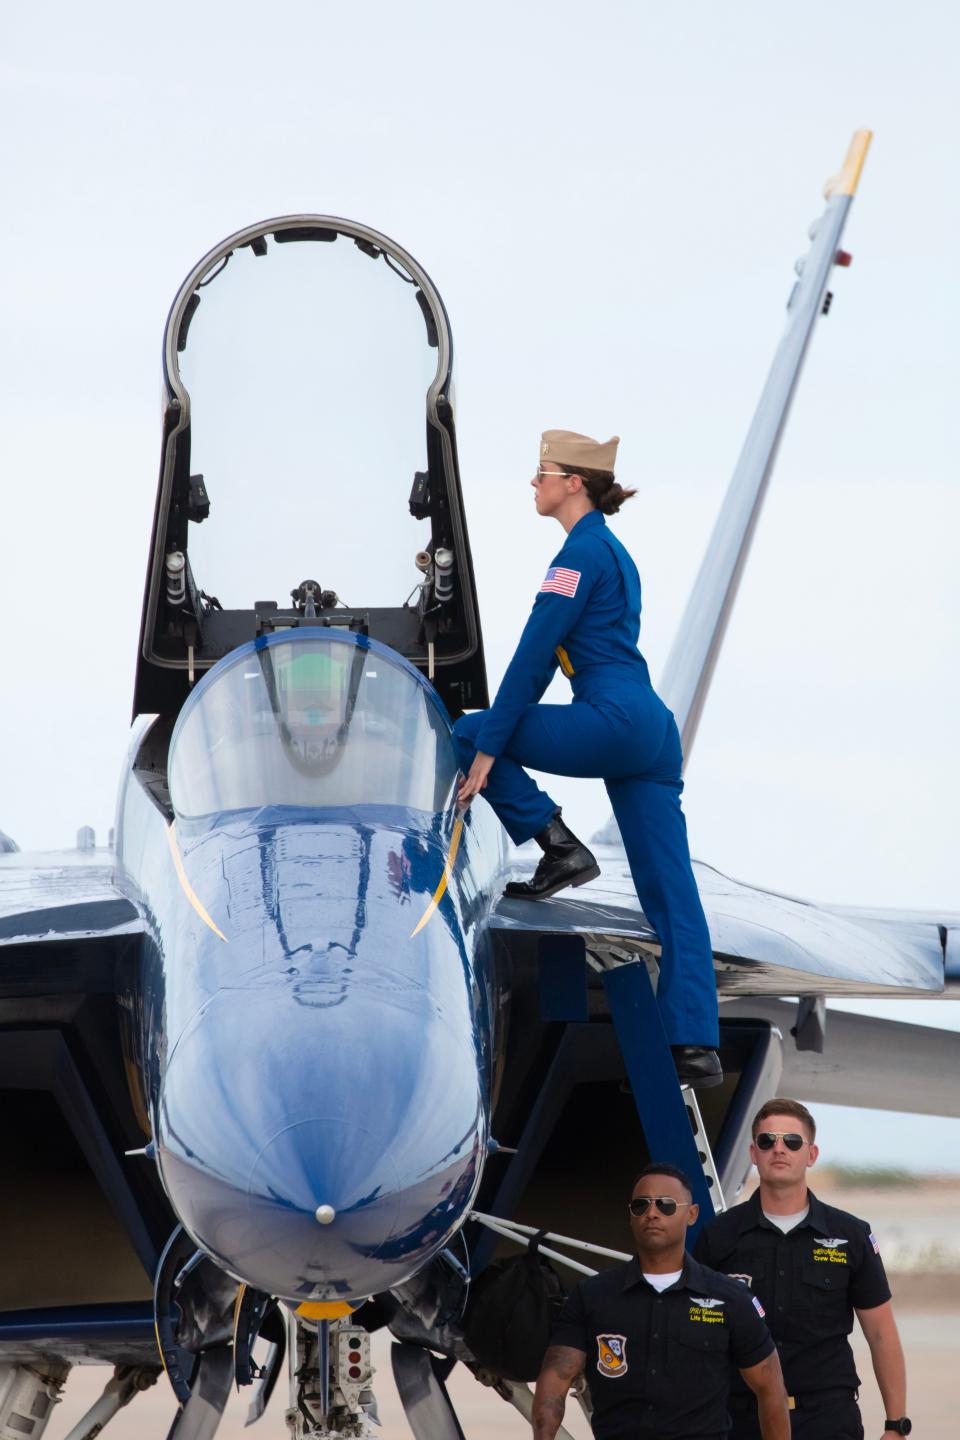 After completing her first public air show performance as a Blue Angel pilot, U.S. Navy Lt. Amanda Lee takes a moment to pose as she exits her F/A-18E/F Super Hornet.